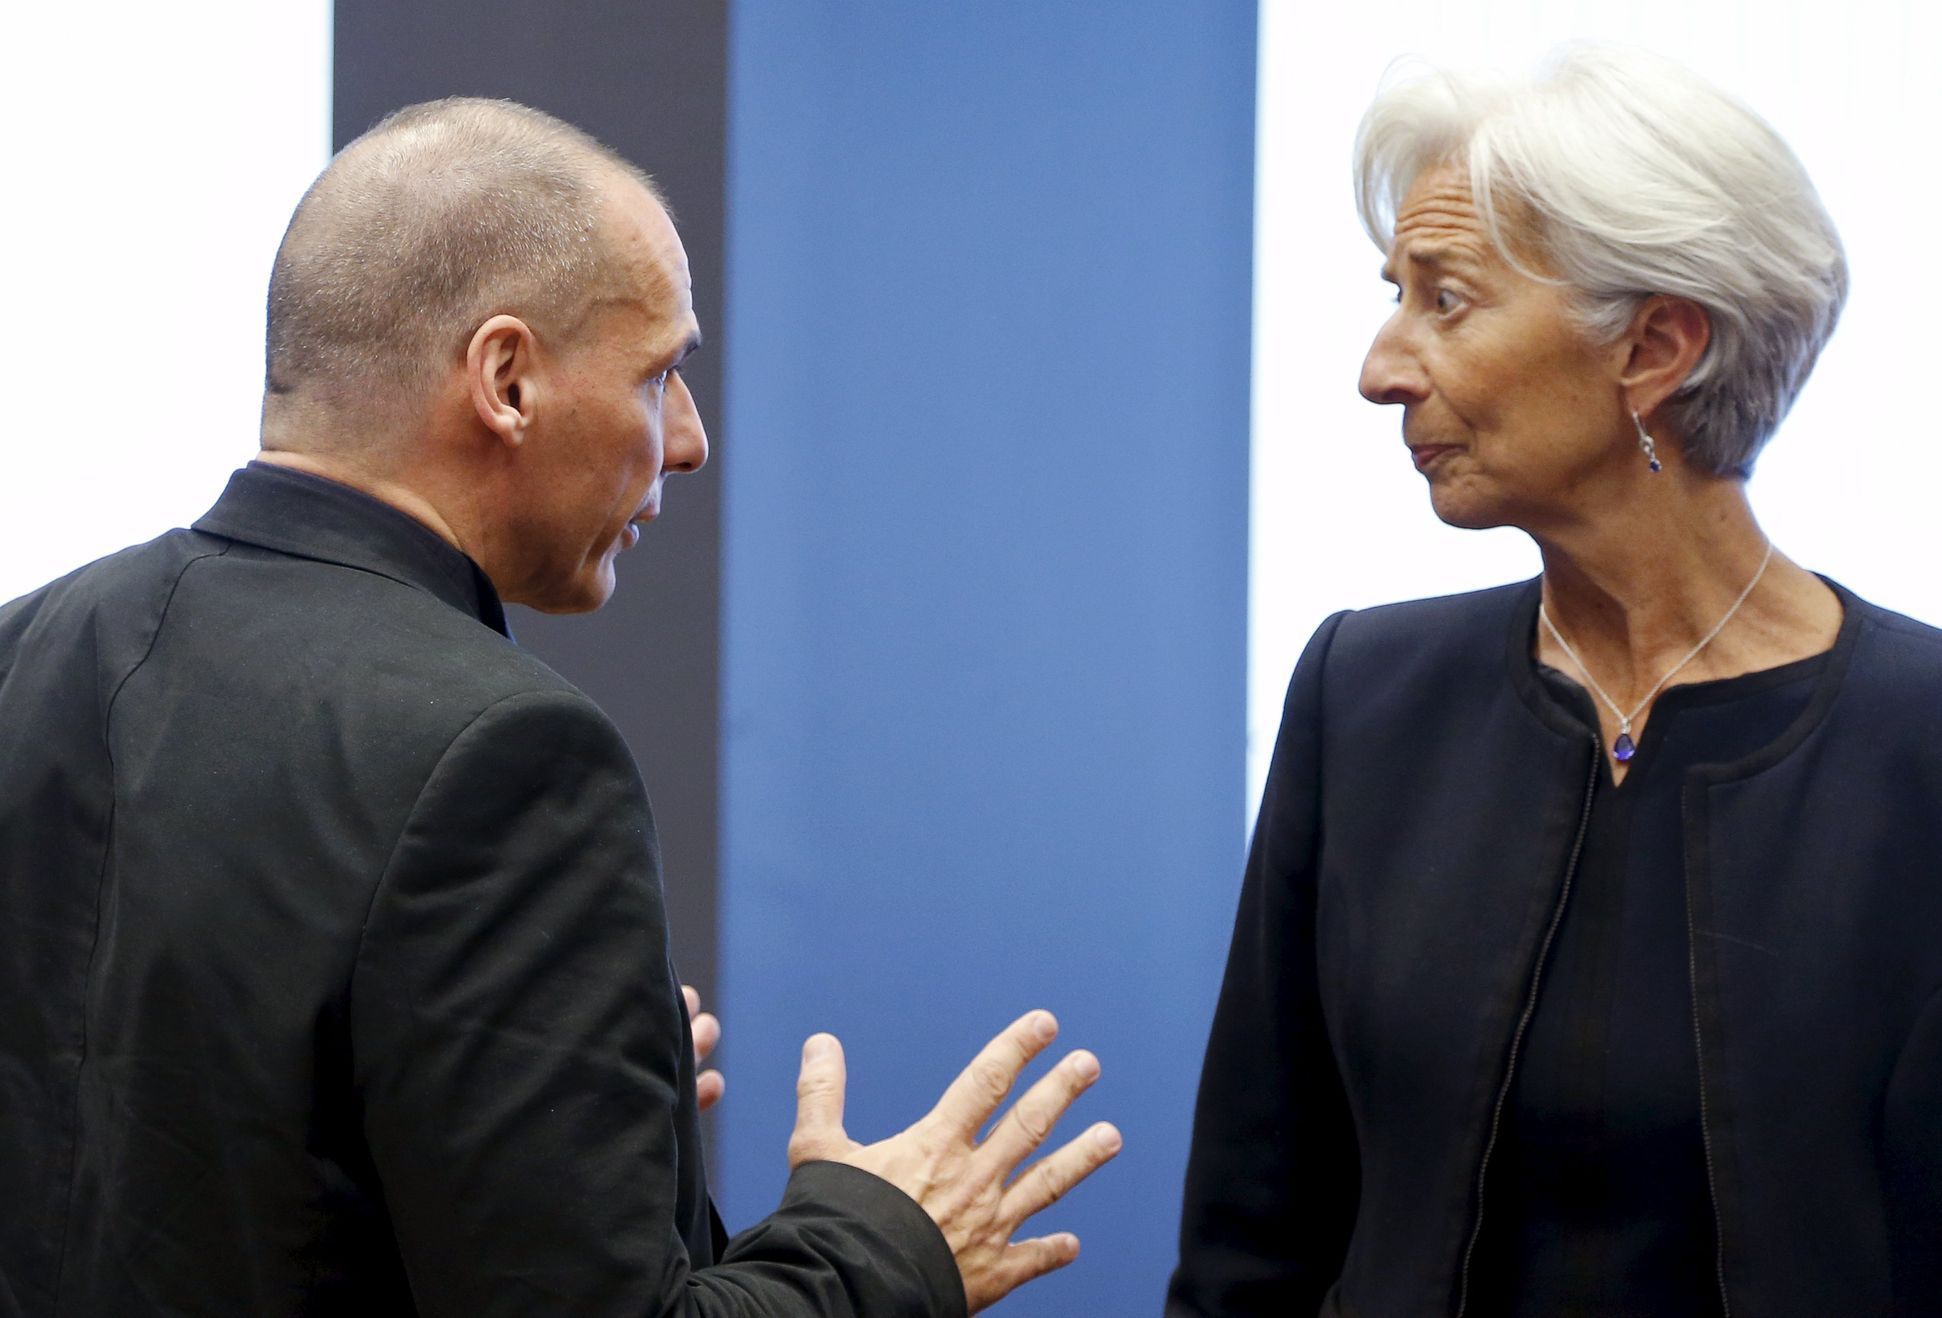 Greek Finance Minister Varoufakis talks to IMF Managing Director Lagarde during an euro zone finance ministers meeting in Luxembourg